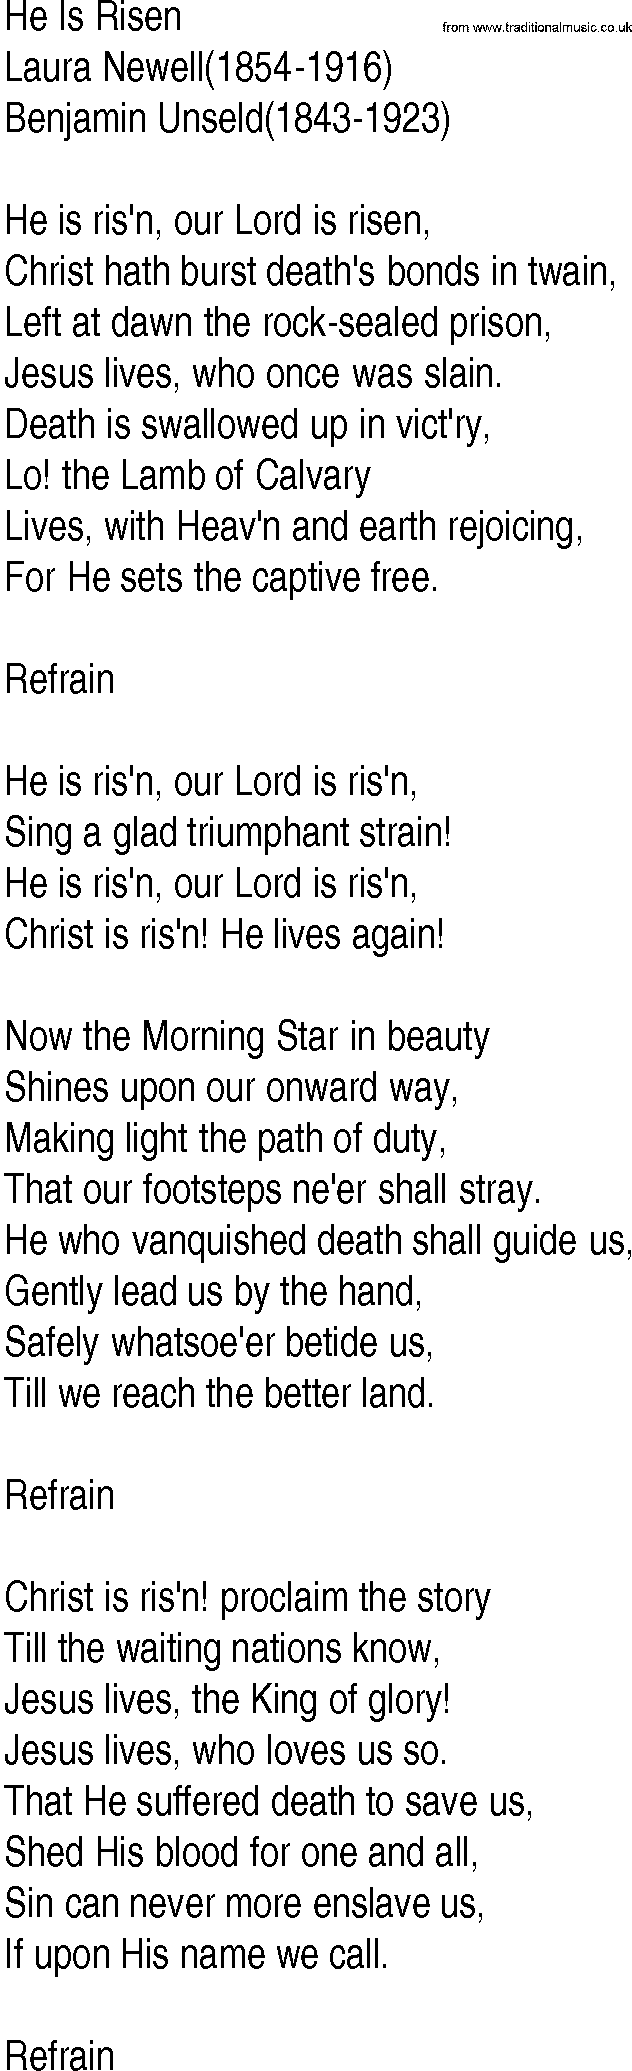 Hymn and Gospel Song: He Is Risen by Laura Newell lyrics